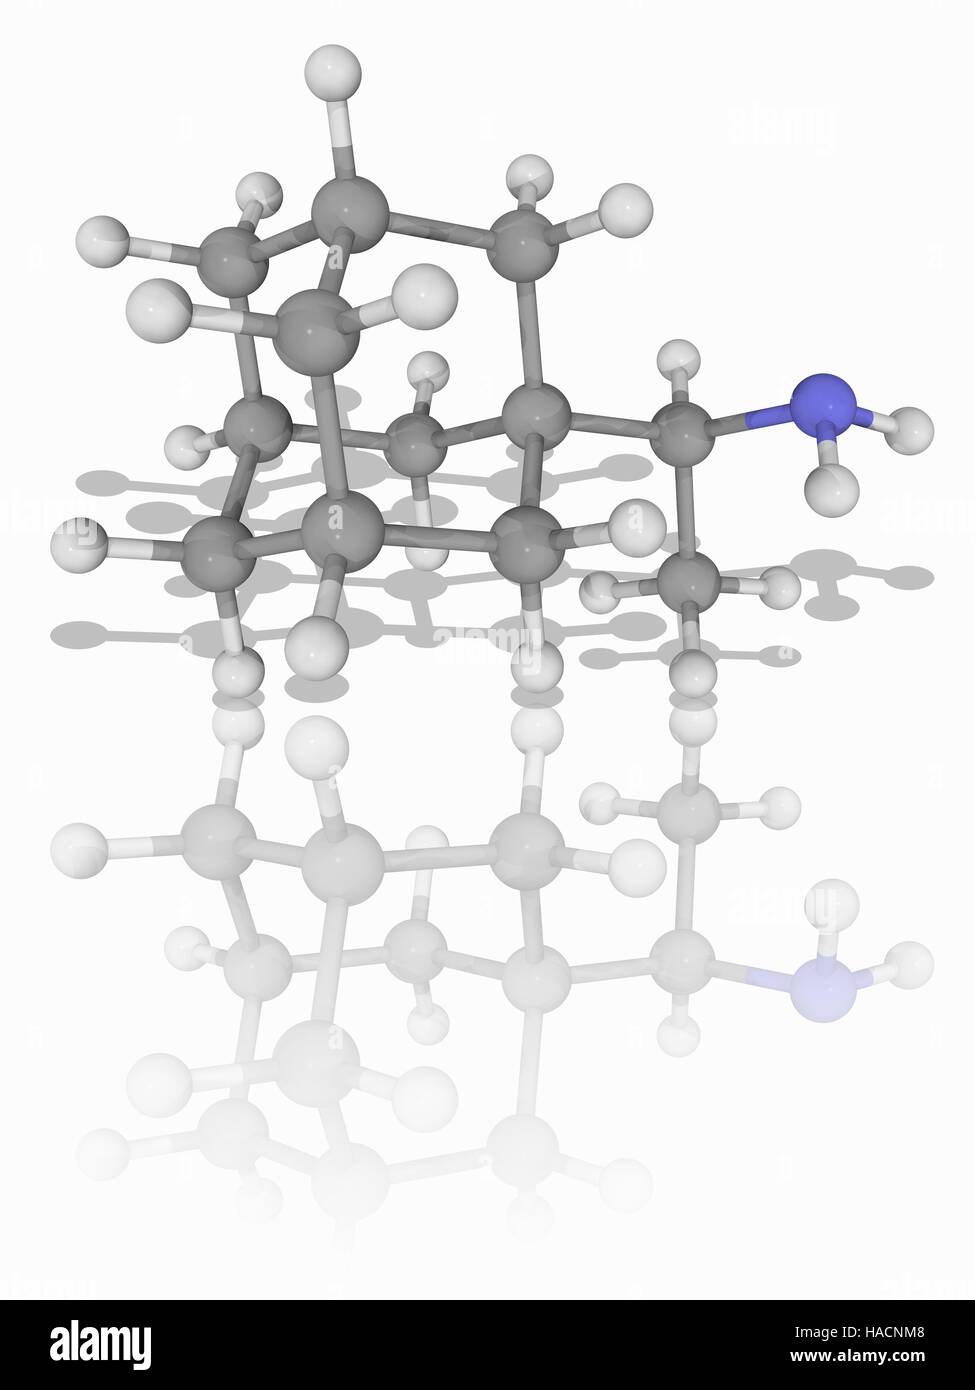 Rimantadine. Molecular model of the anti-viral drug rimantadine (C12.H21.N), marketed as Flumadine. This drug is used to treat influenza A infections. Atoms are represented as spheres and are colour-coded: carbon (grey), hydrogen (white) and nitrogen (blue). Illustration. Stock Photo